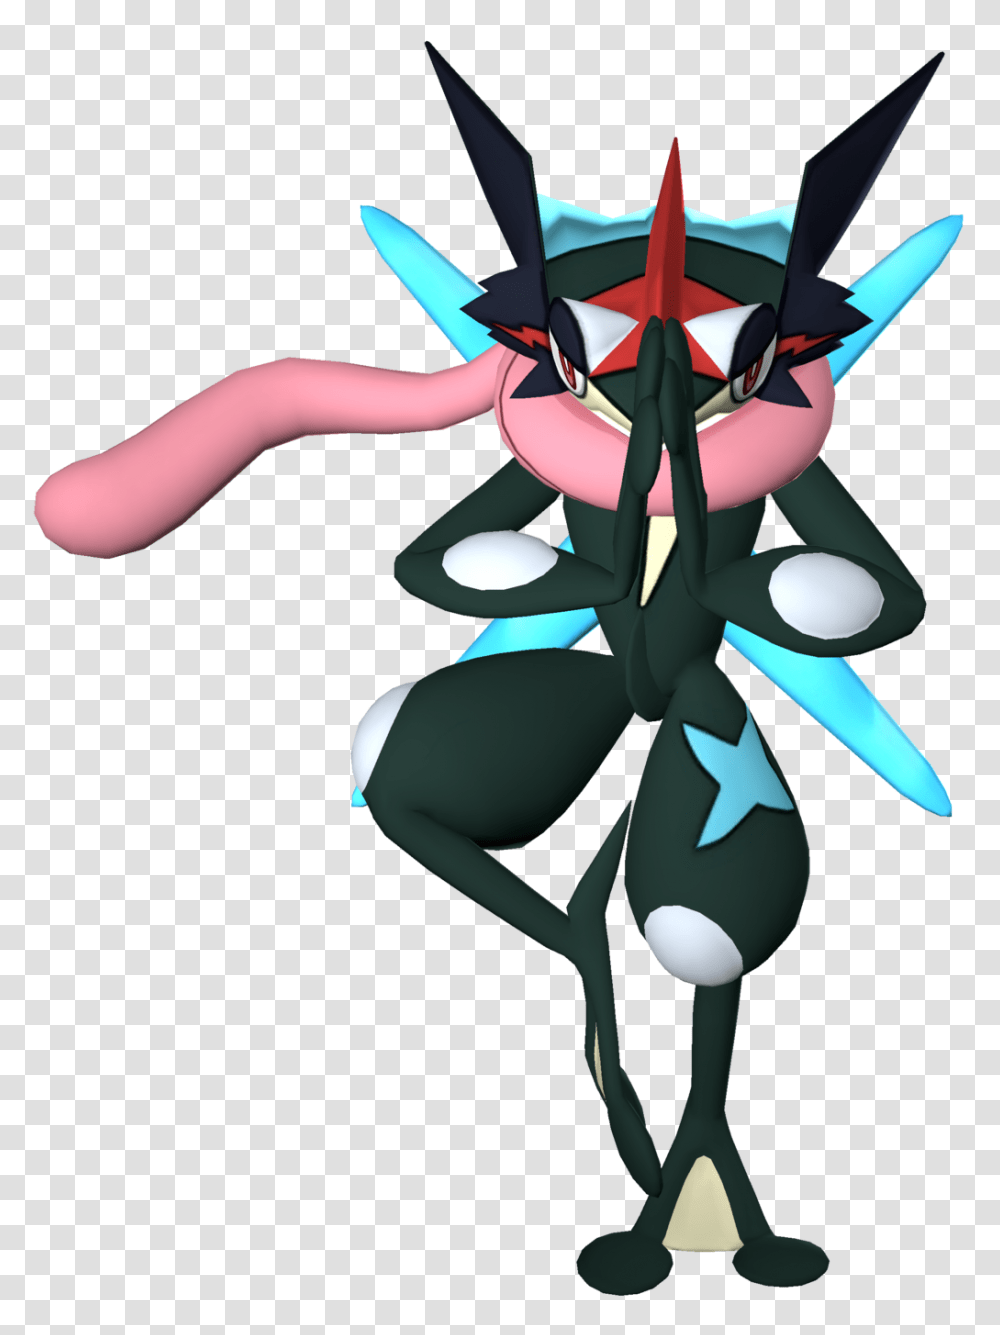 Image Result For Pictures Of Greninja The Pokemon Cartoon Mega, Toy, Pattern, Ornament Transparent Png